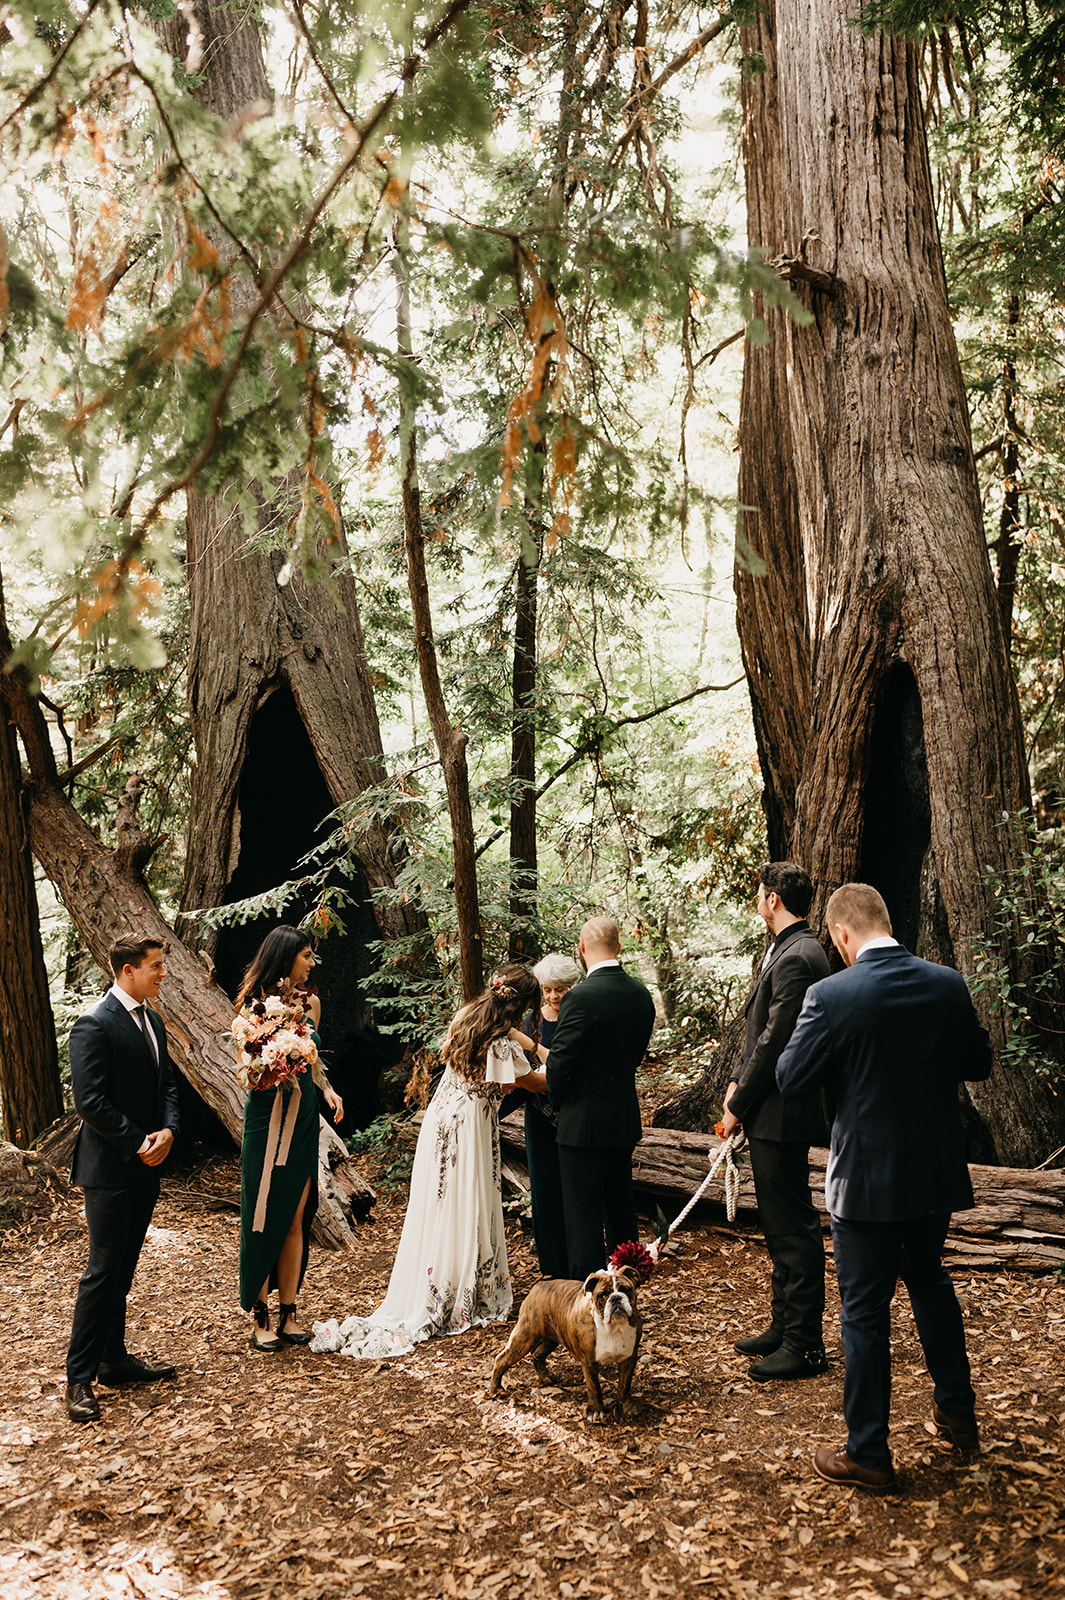 Elopement ceremony among the tall redwood trees in Big Sur California